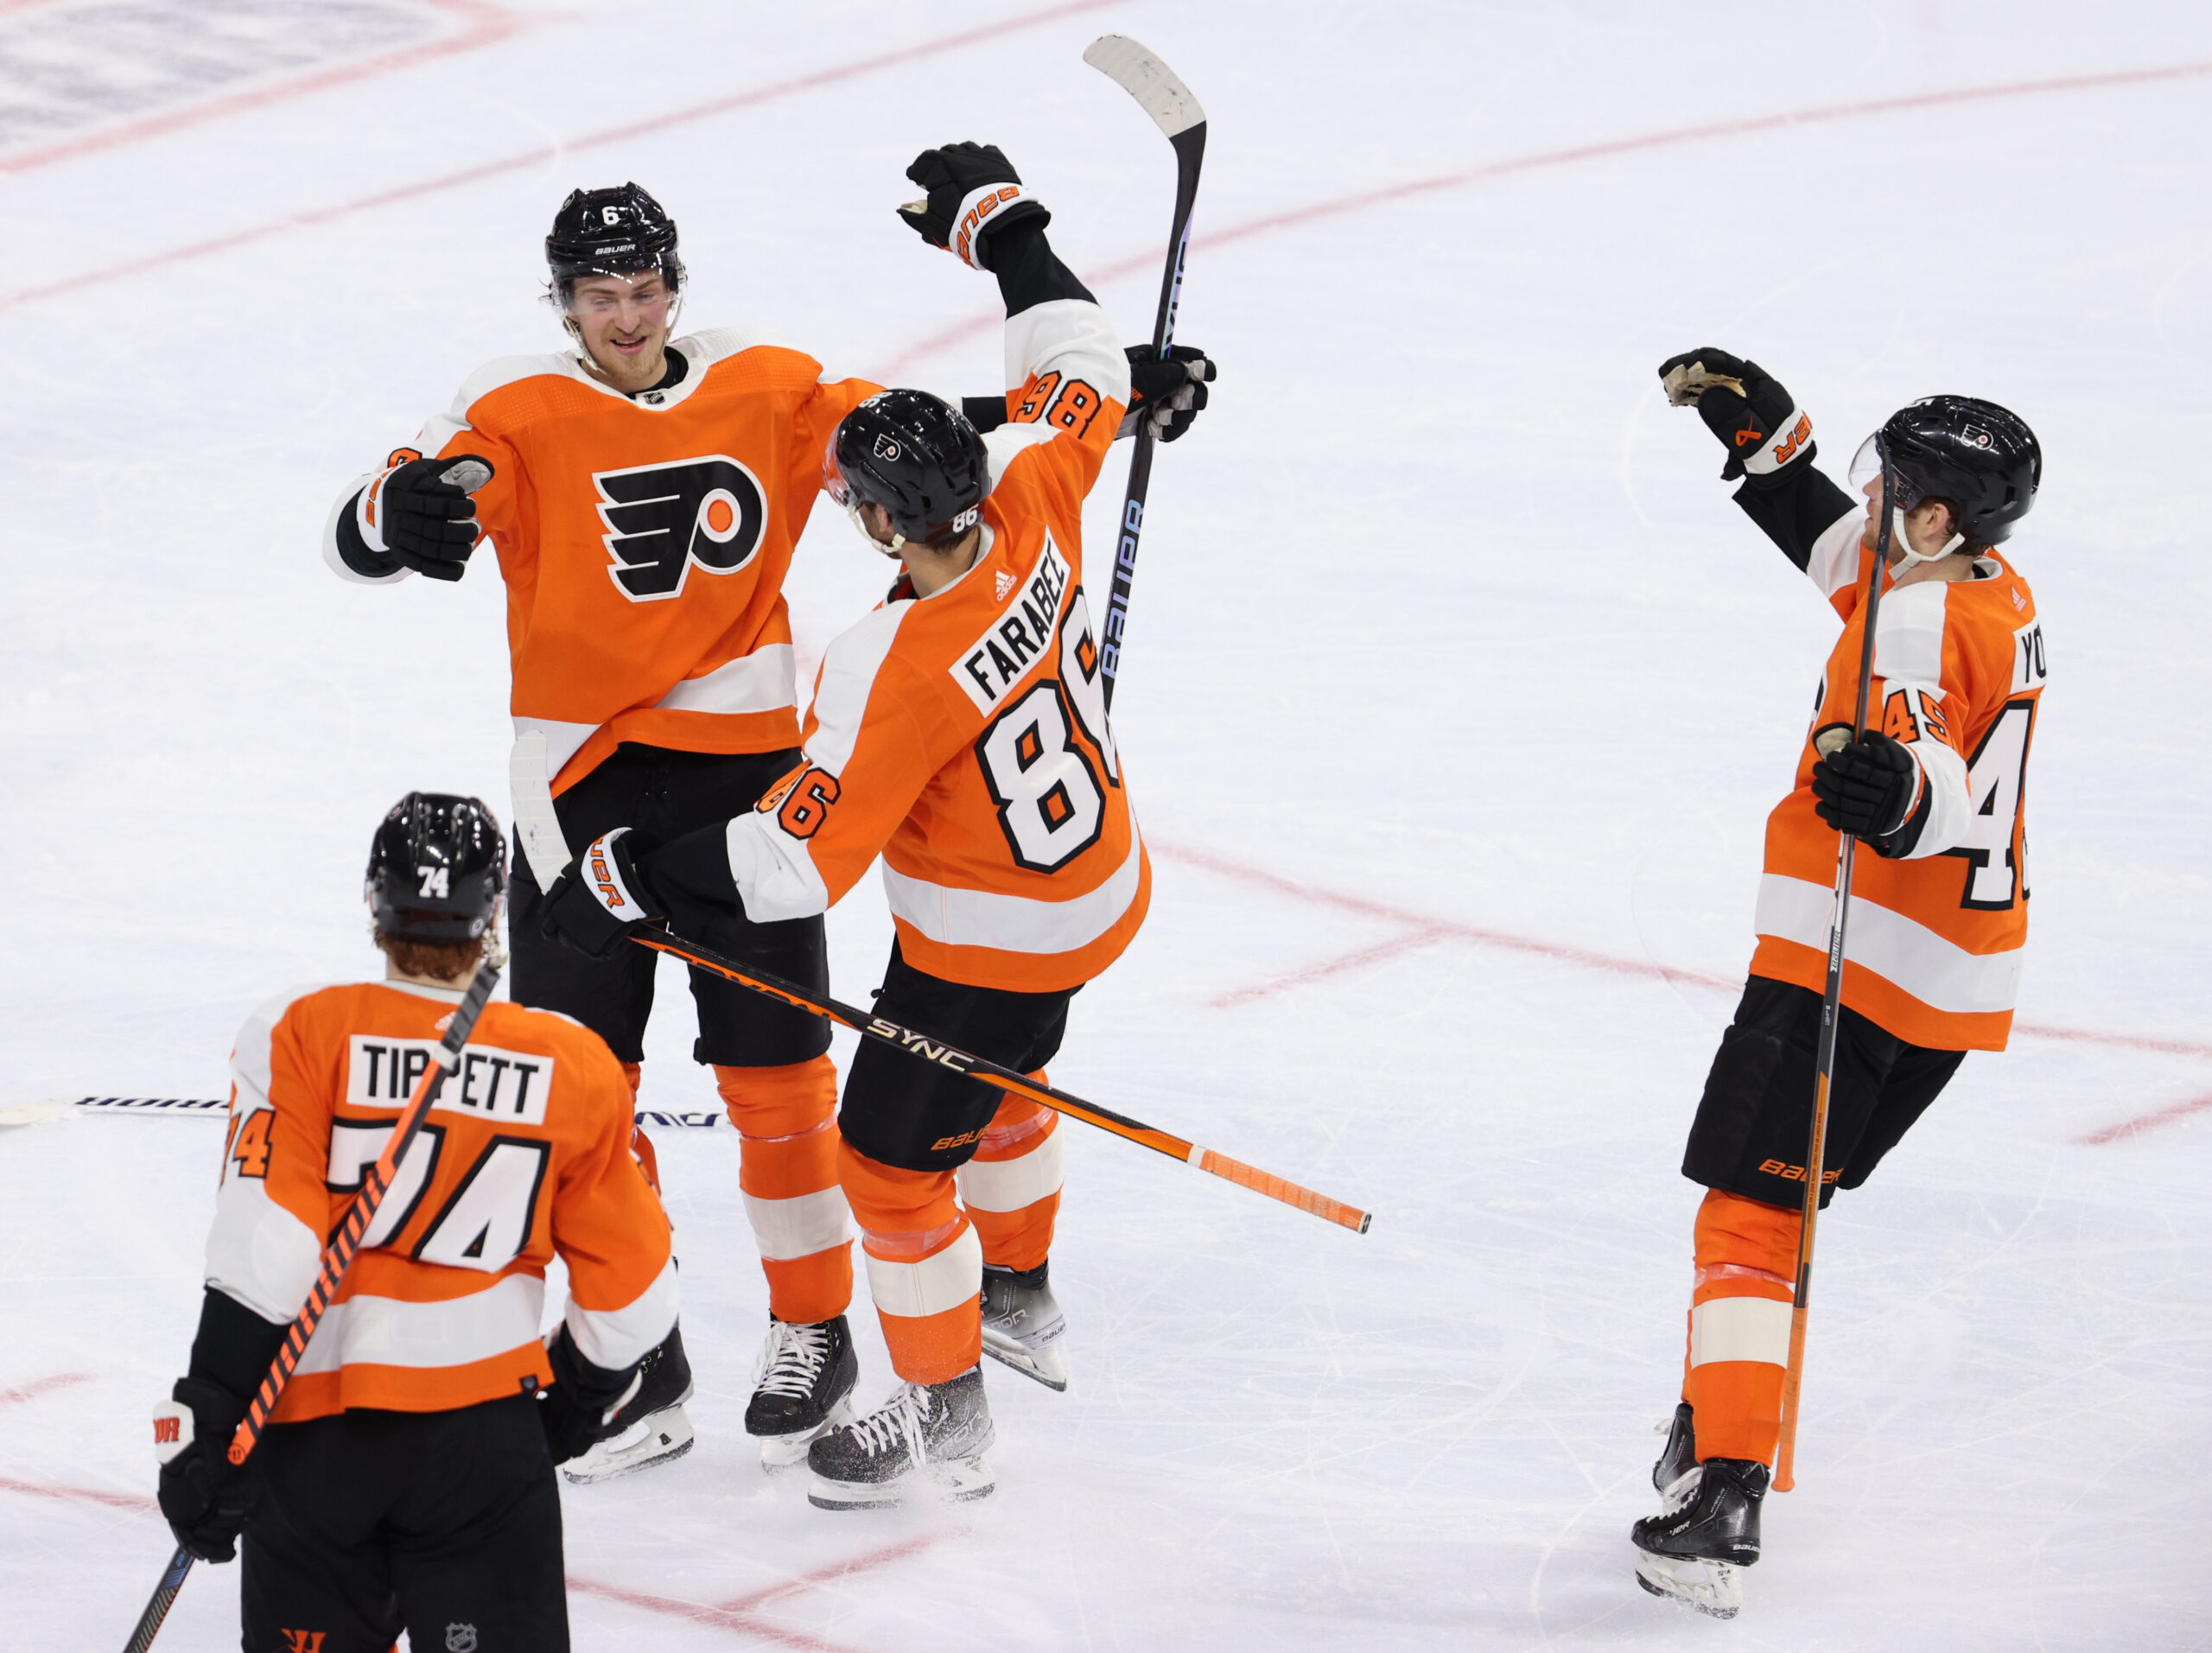 Flyers defenceman Tony DeAngelo clears waivers, becomes free agent